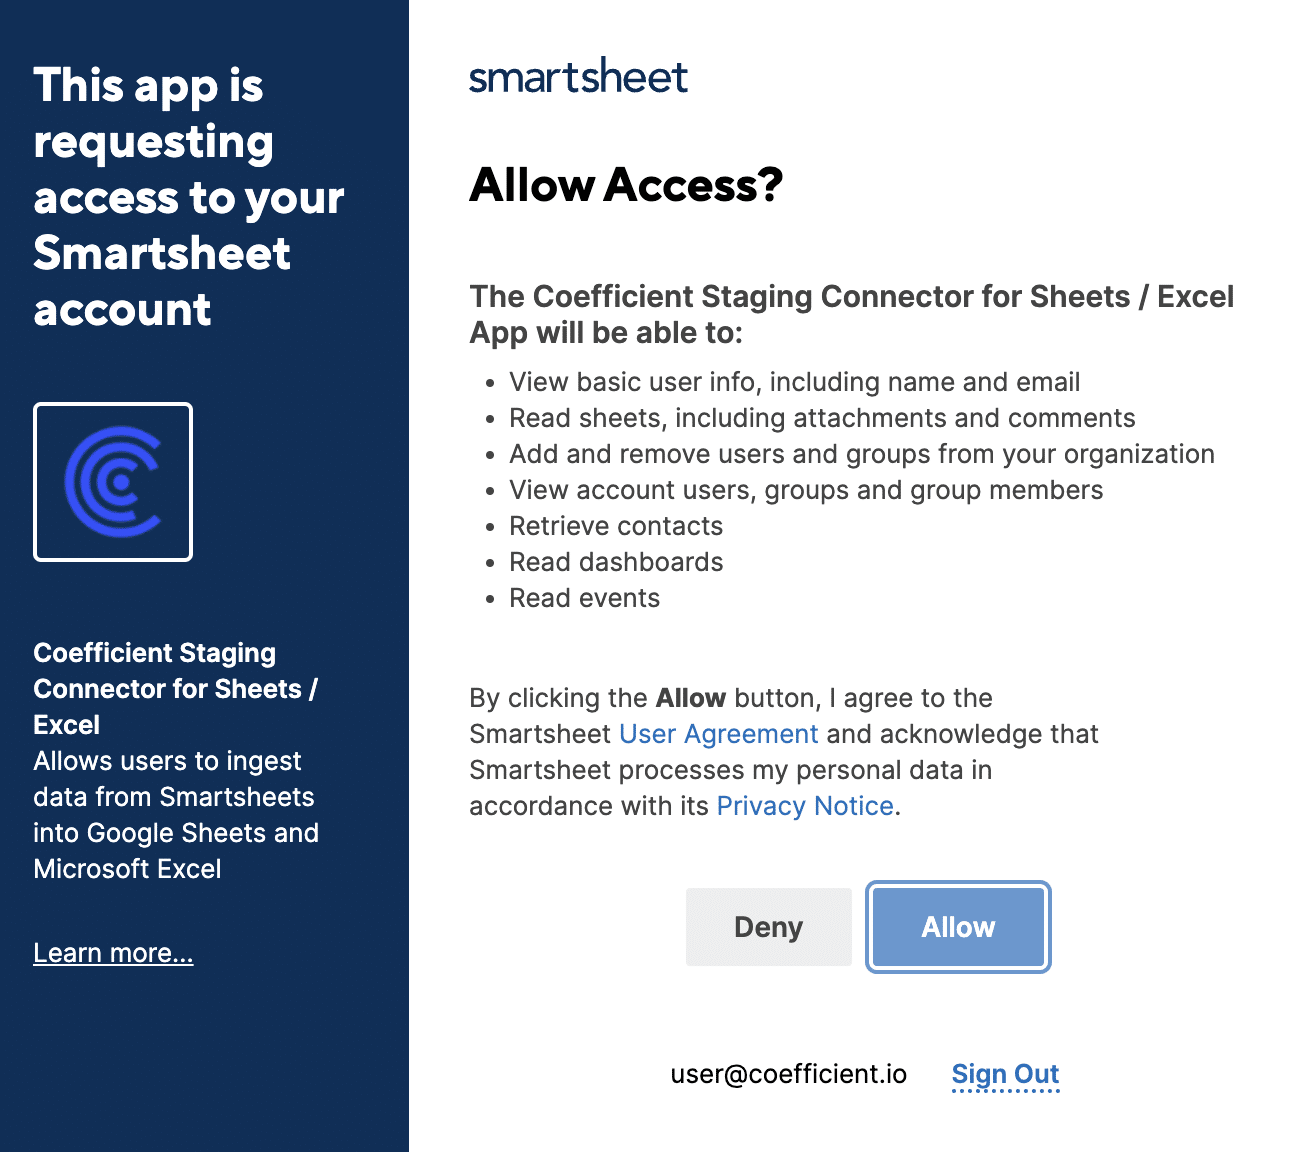  Select 'Allow' and log in to your Smartsheet account 